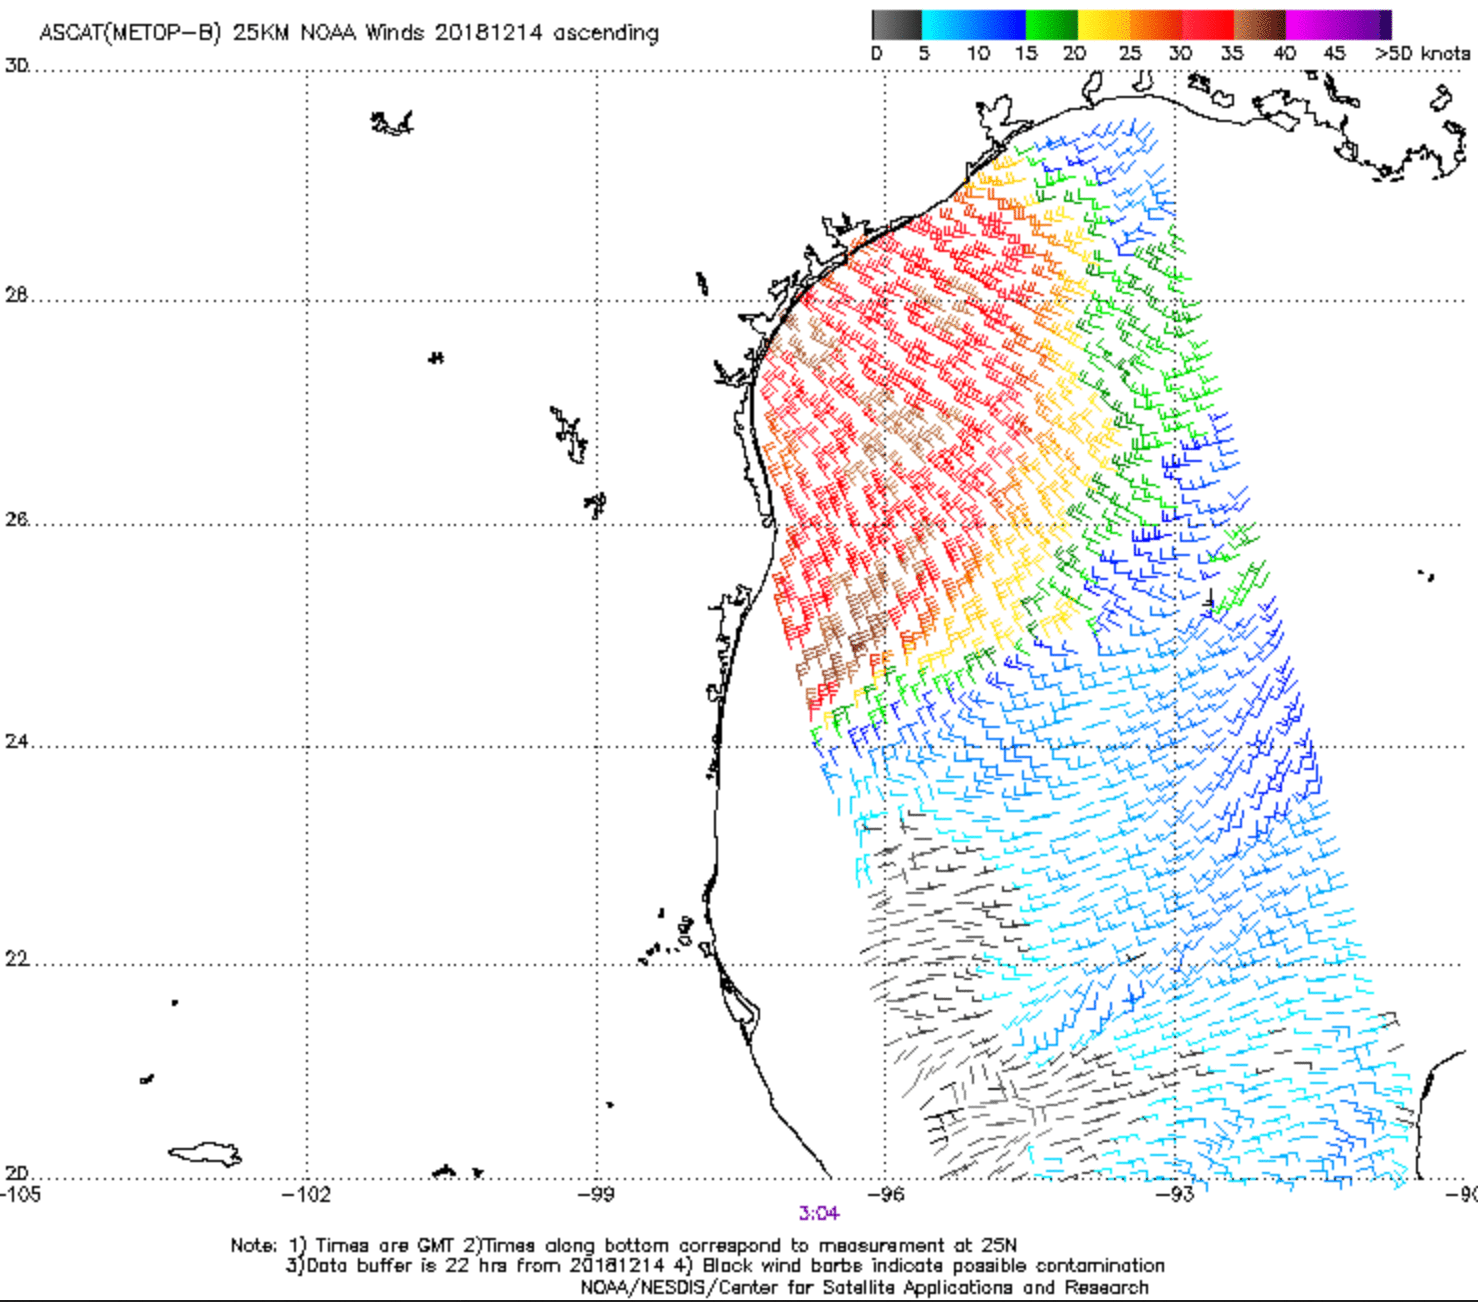 Metop-A and Metop-B ASCAT surface scatterometer winds across the western Gulf of Mexico [click to enlarge]